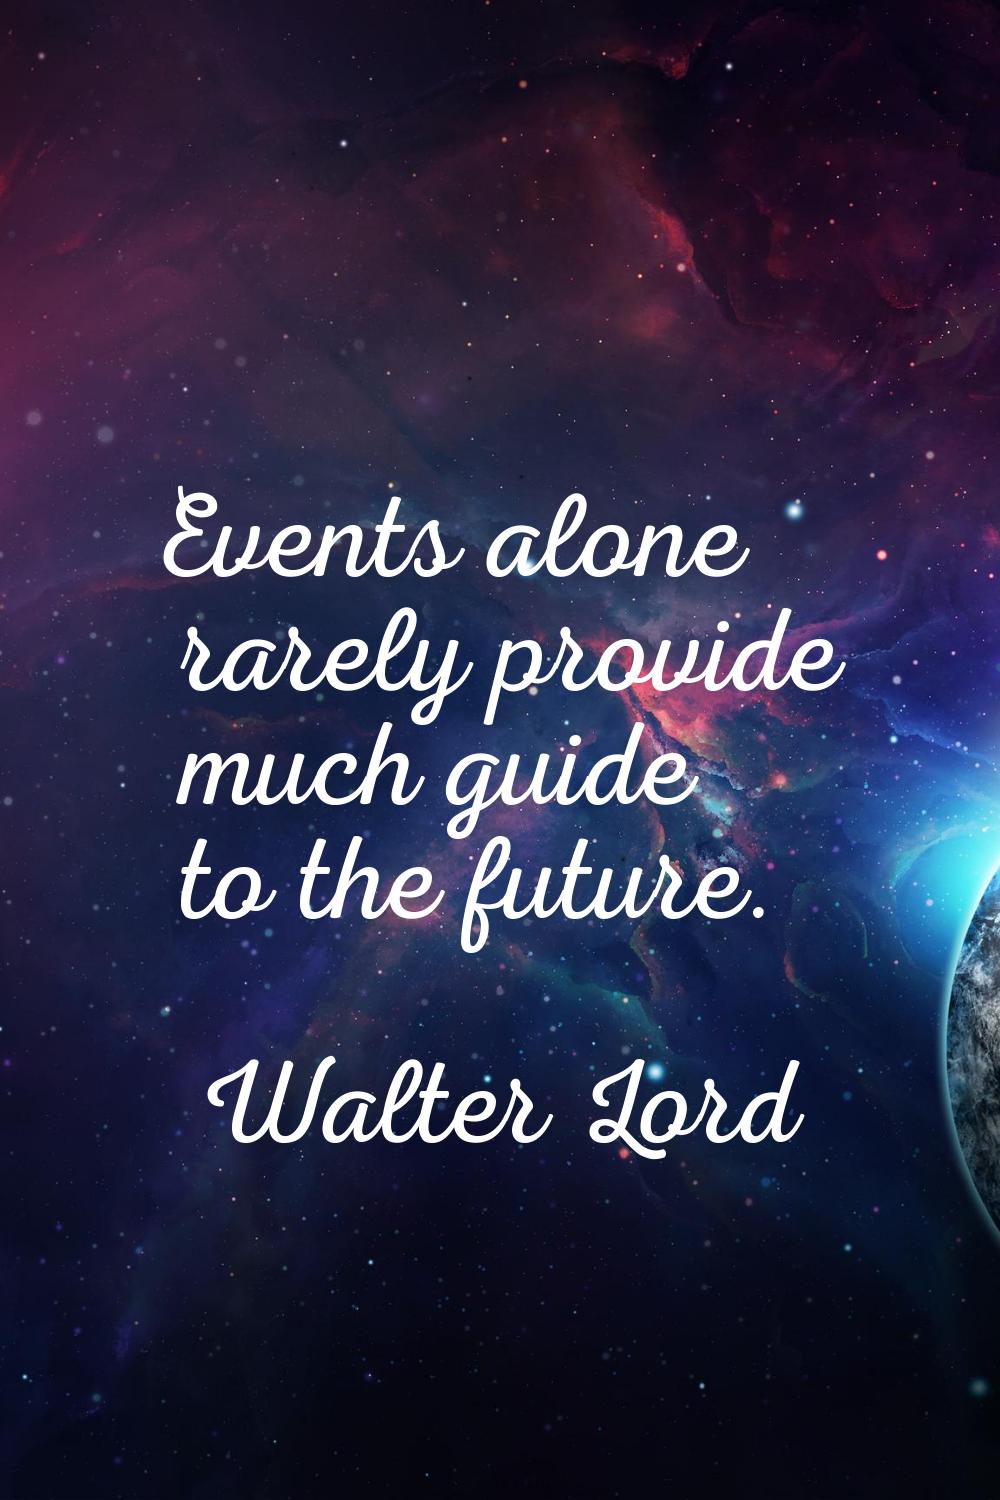 Events alone rarely provide much guide to the future.